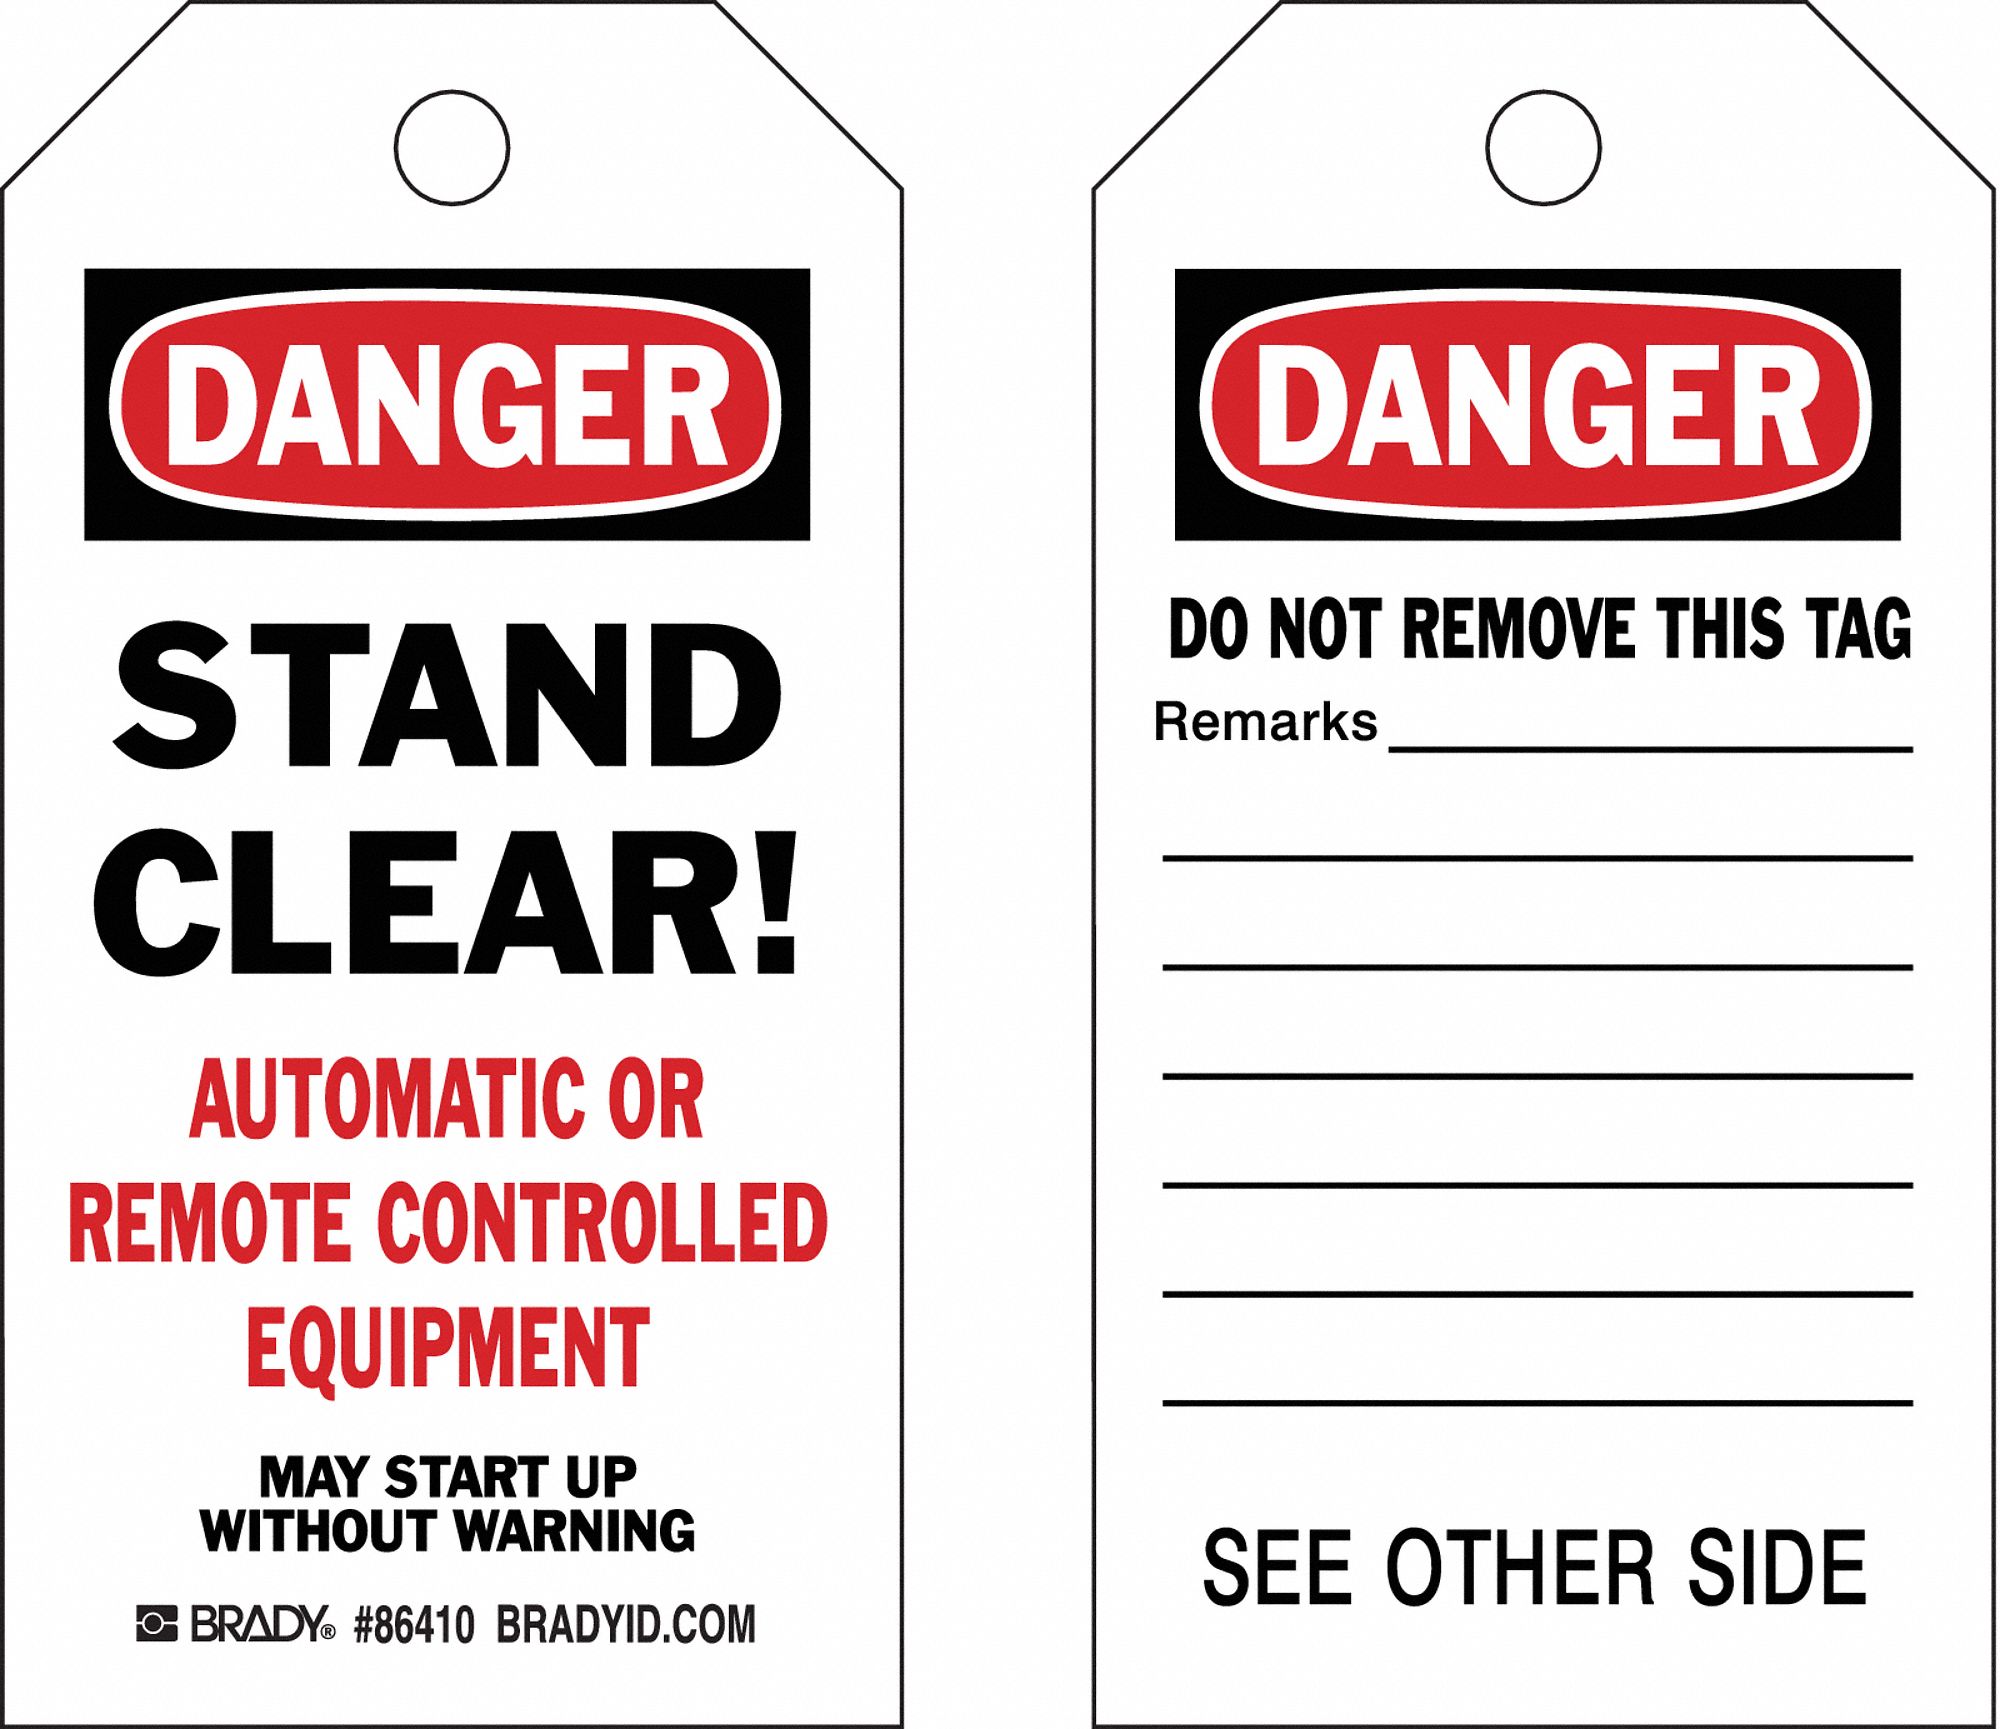 CardstockStand Clear! Automatic Or Remote Controlled Equipment, Danger Tag 7